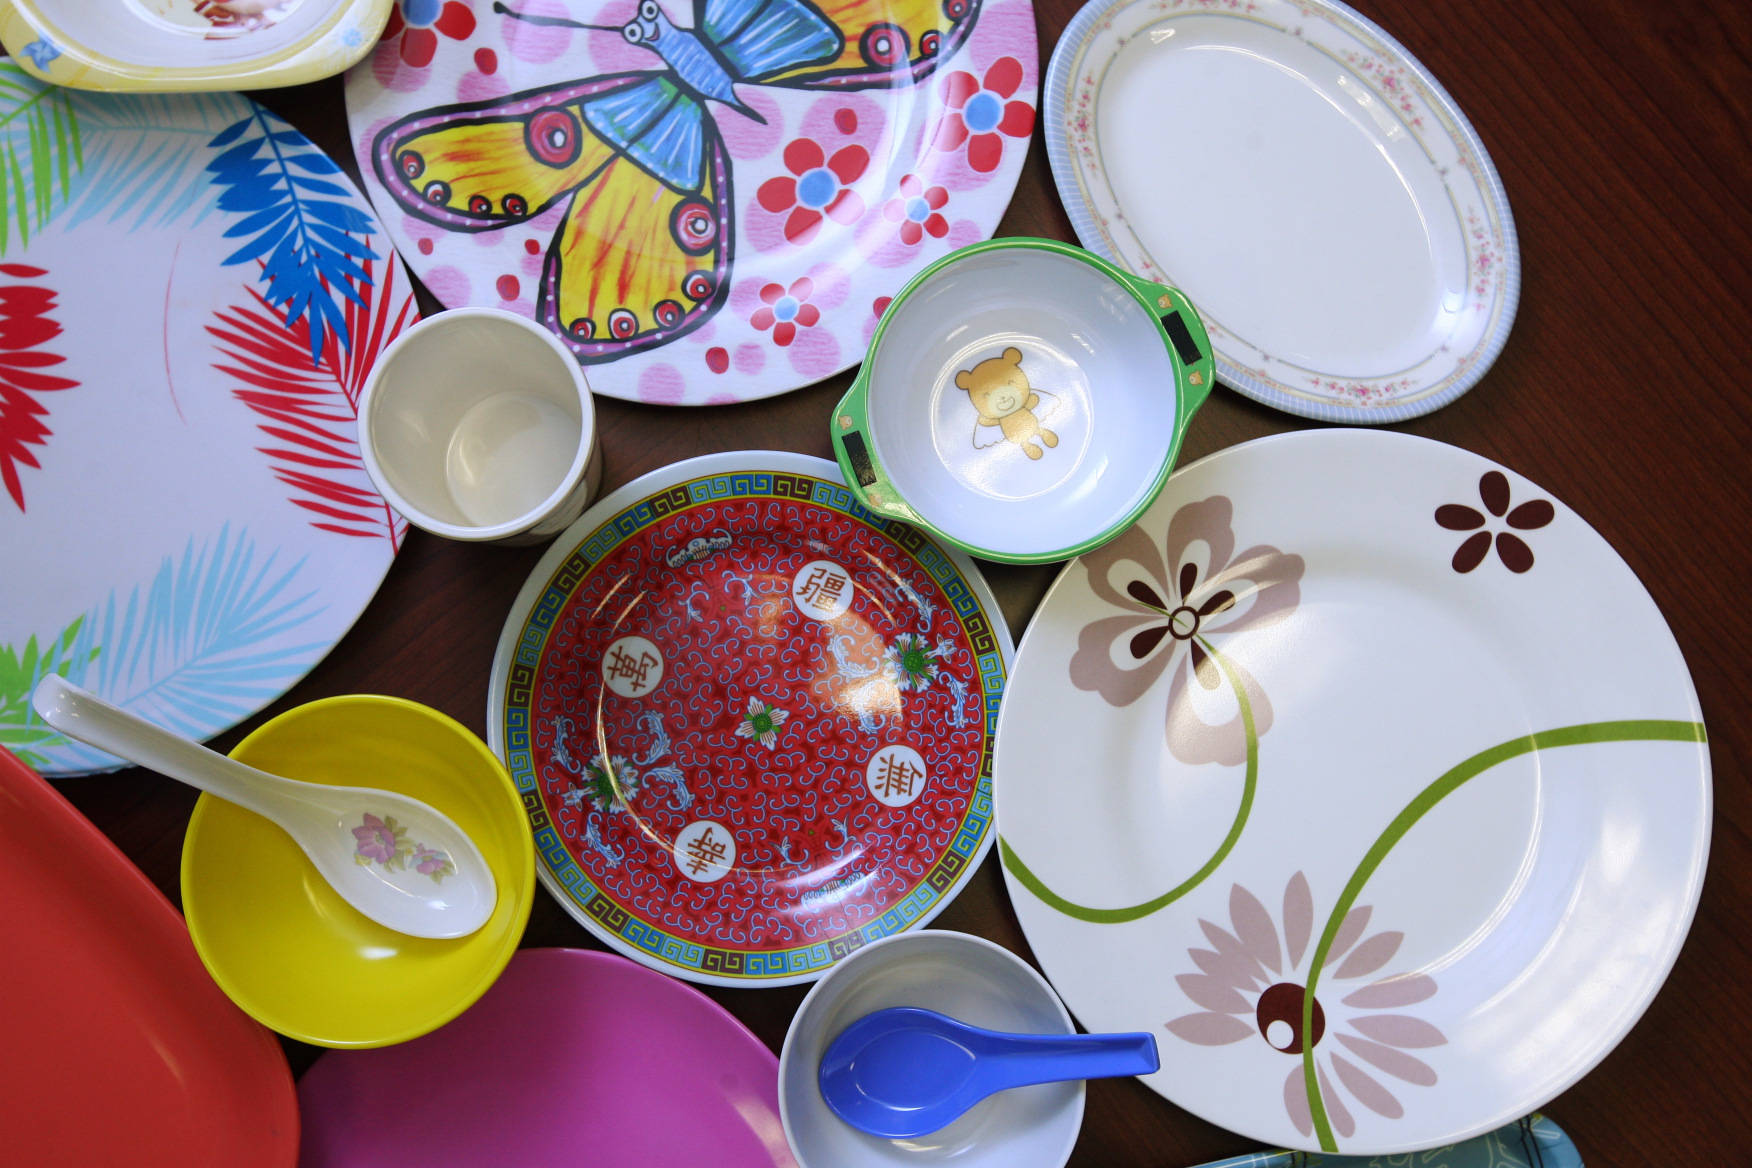 The EU says imports of Chinese ceramic tableware and kitchenware are crowding out domestic sales. Photo: Sam Tsang